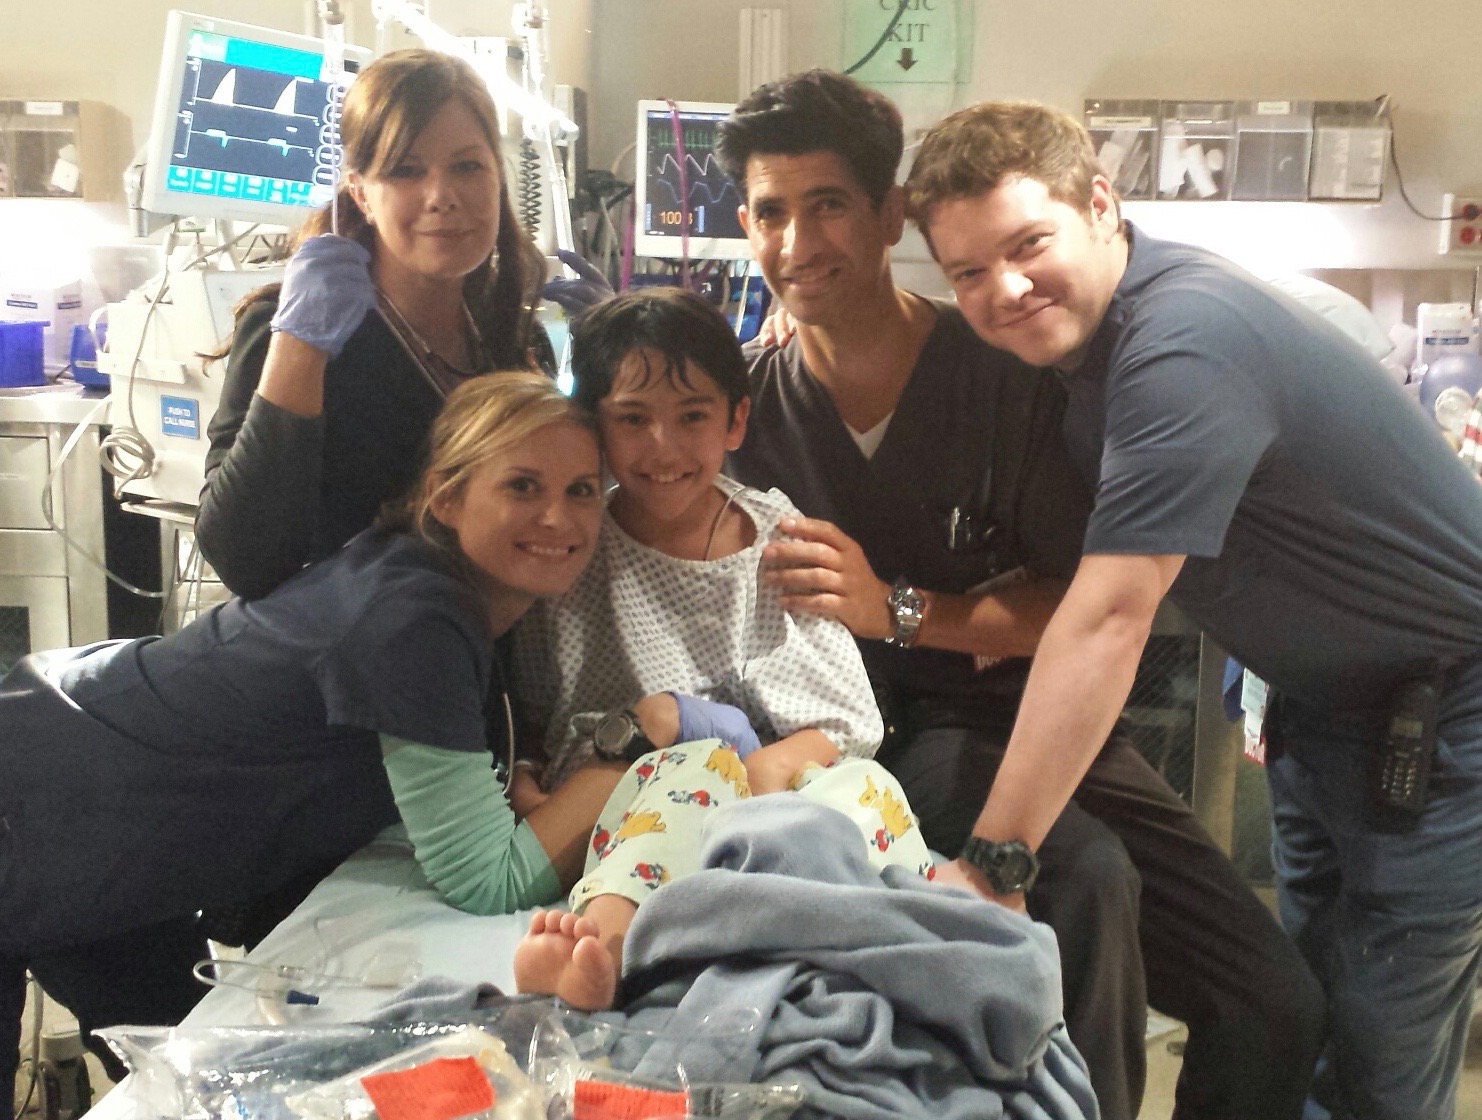 On set with the cast of Code Black - Marcia Gay Harden, Razza Jaffrey, Harry Ford and Bonnie Somerville.